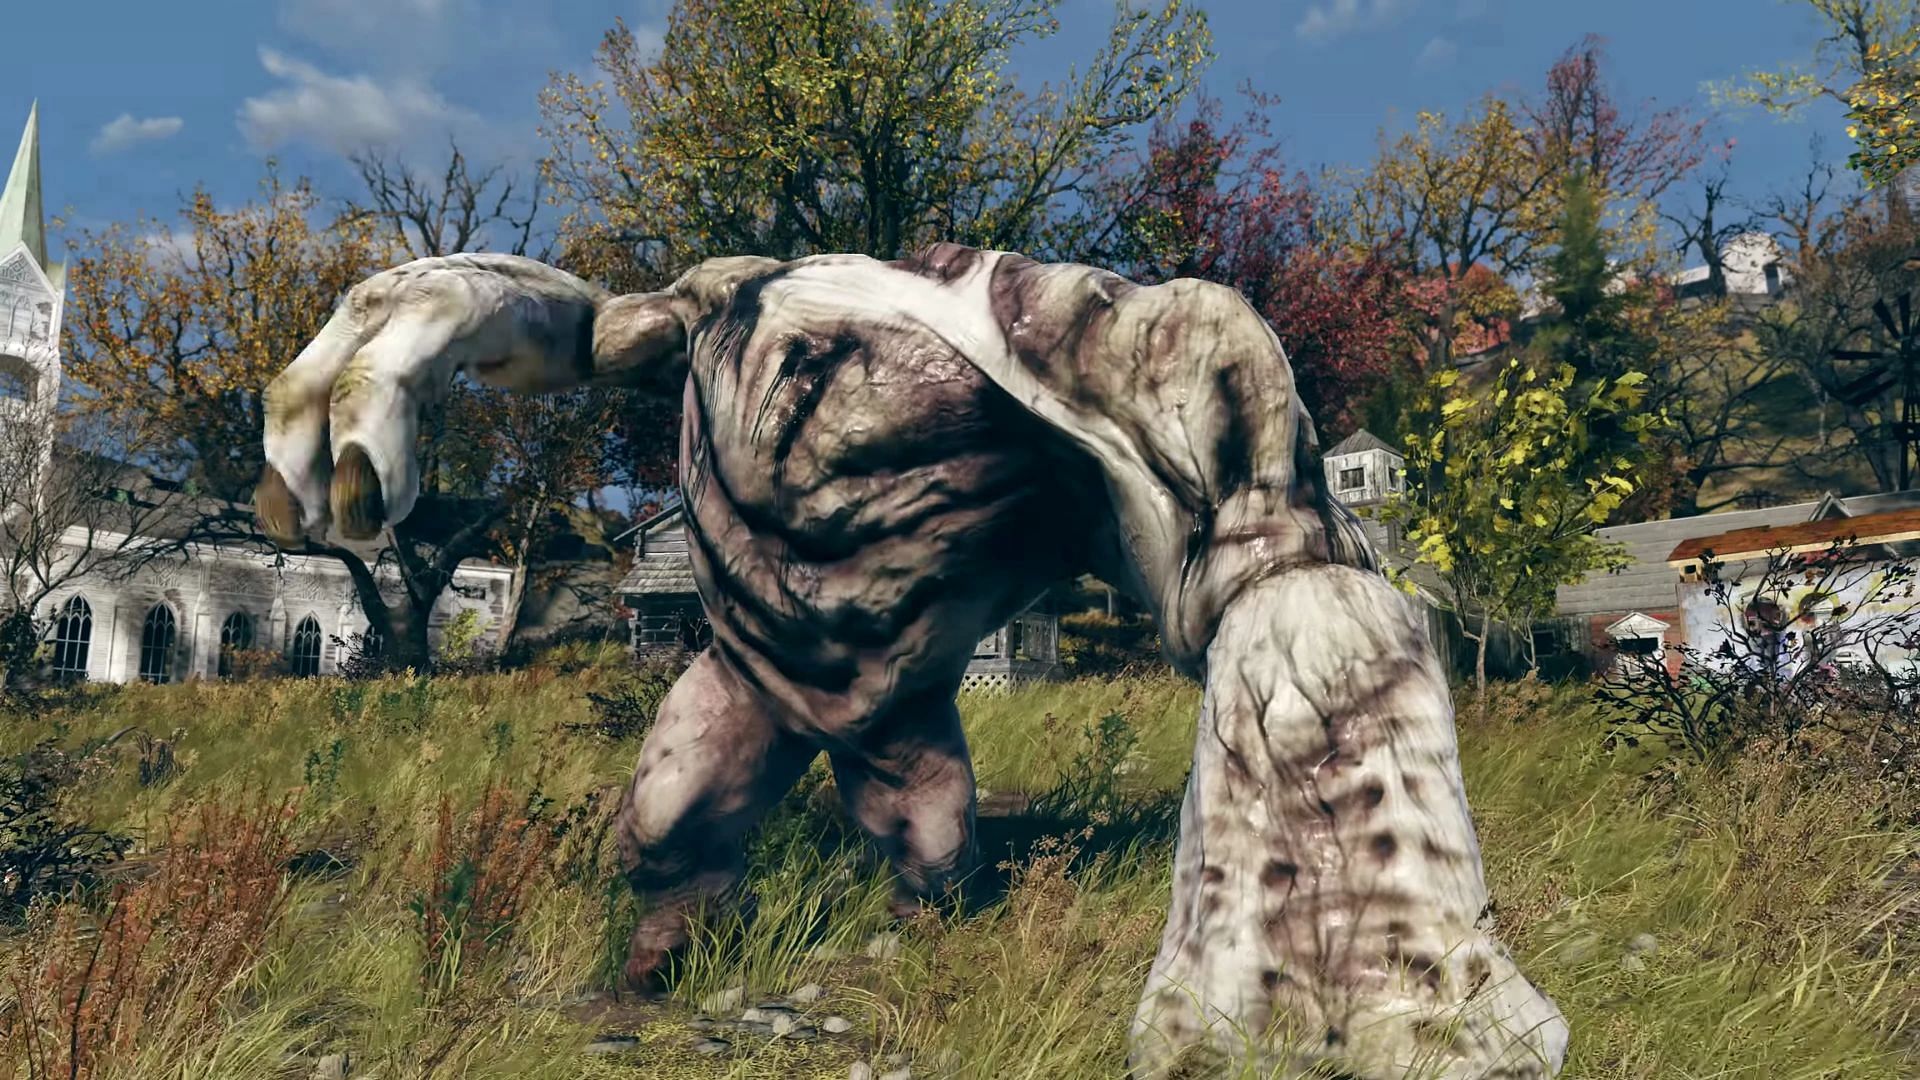 Grafton Monster in a mutated beast with no head (Image via Bethesda Game Studios)